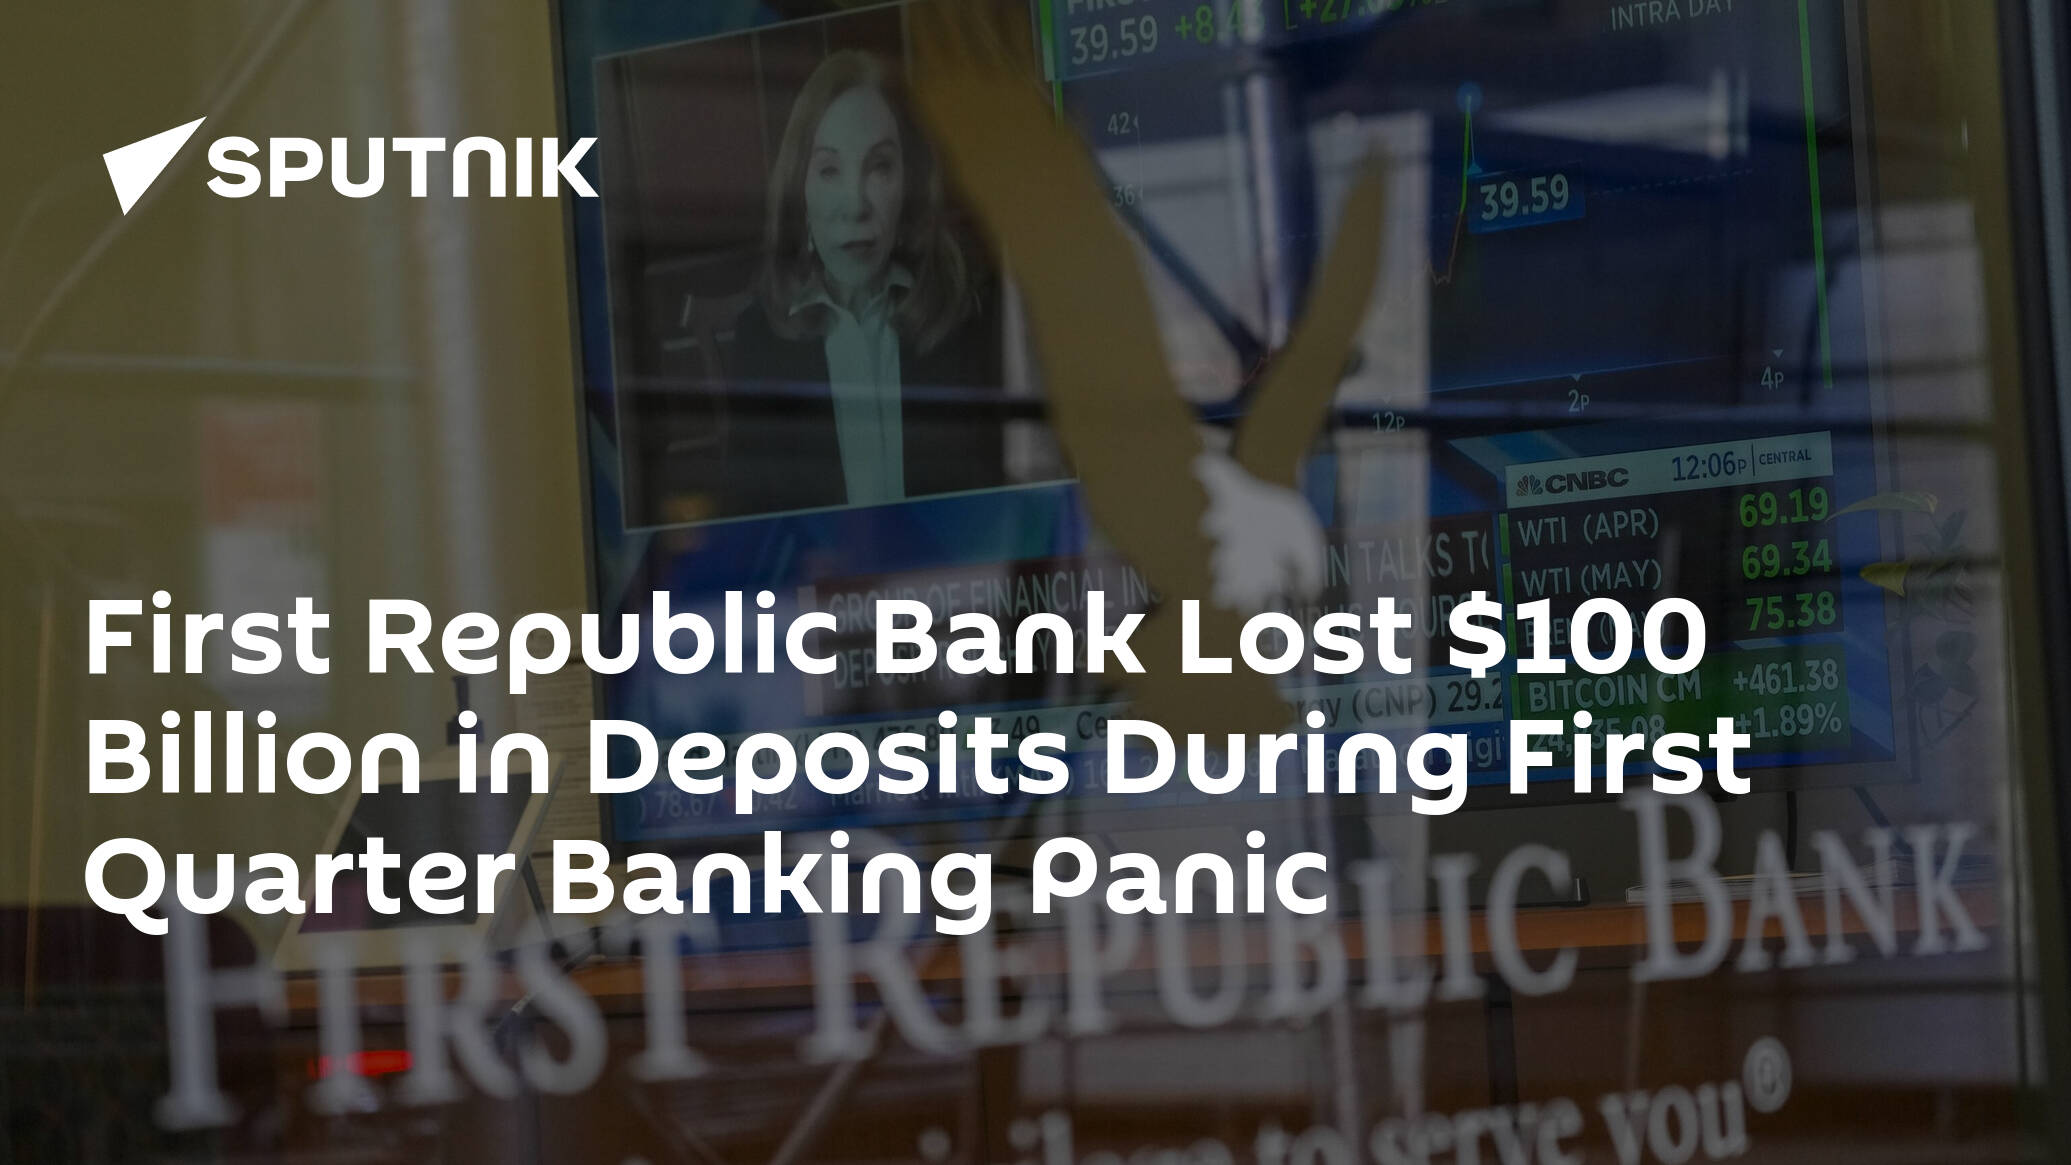 First Republic Bank Lost 0 Billion in Deposits During First Quarter Banking Panic